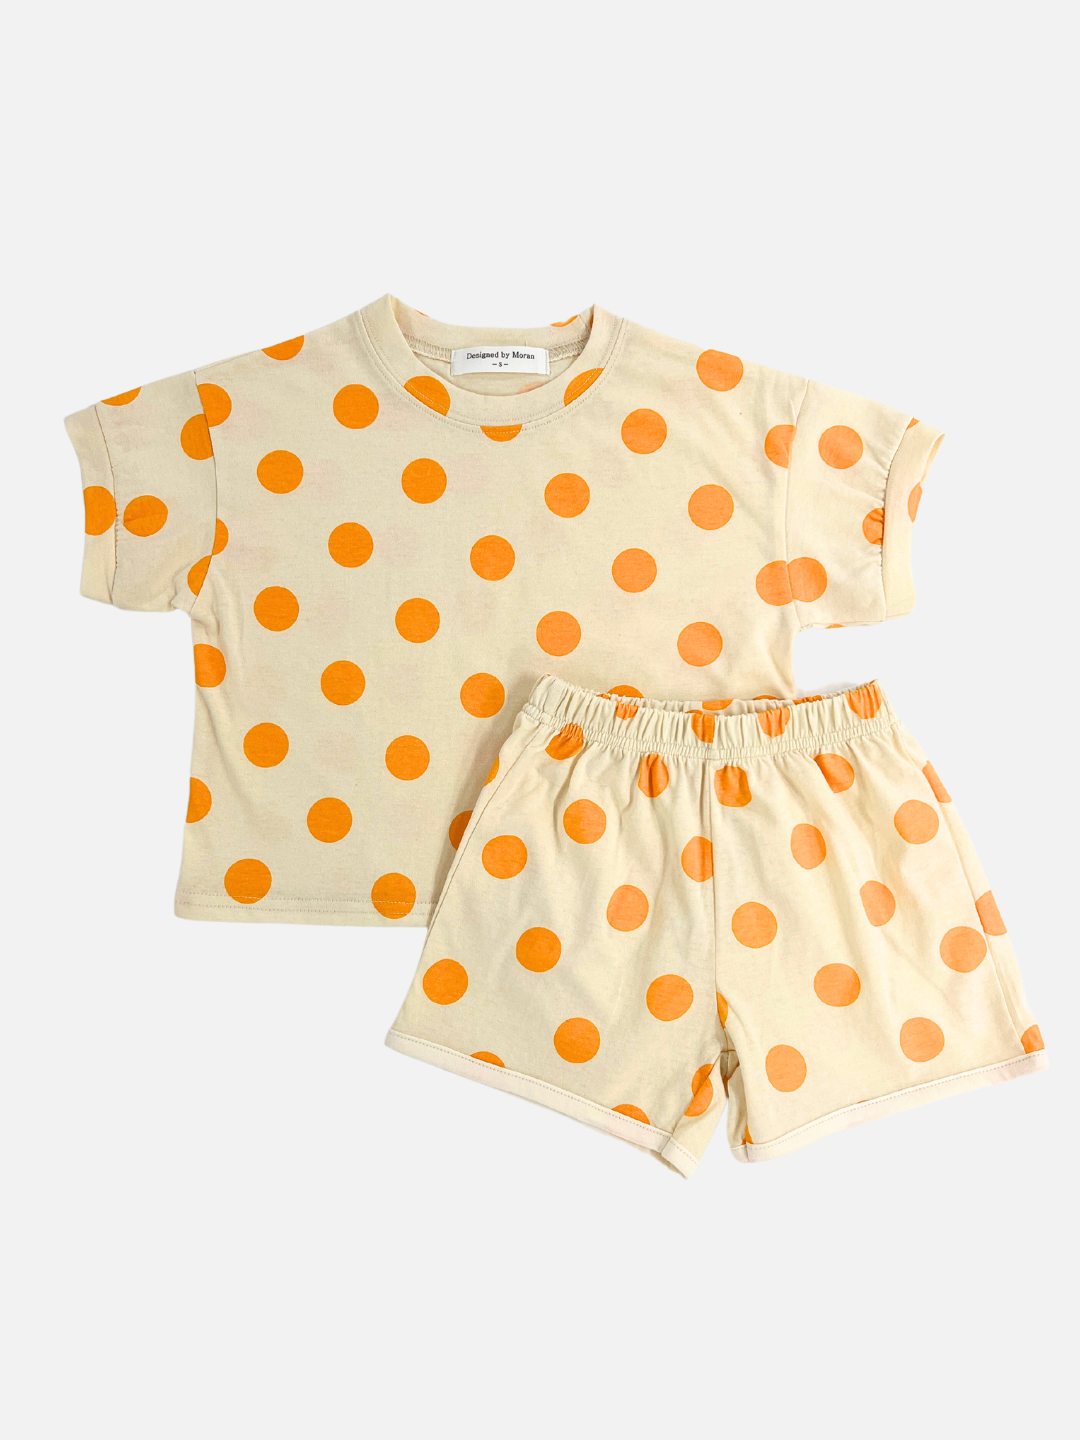 Orange | A kids' tee shirt and shorts set in a pattern of orange dots on an ecru background